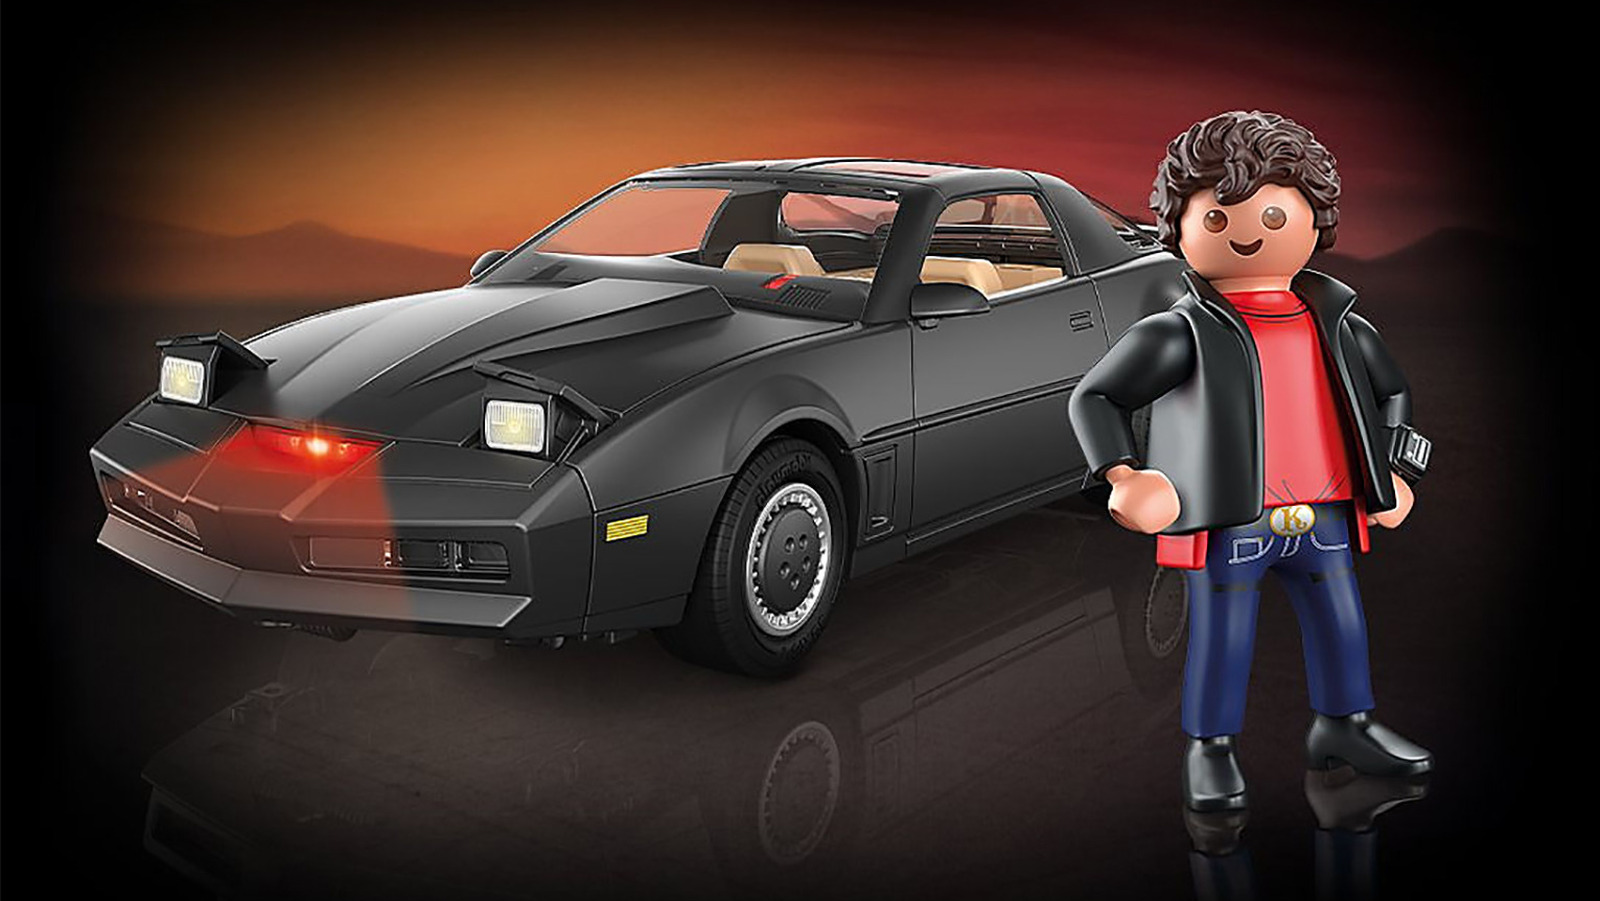 Trust Doesn't Rust In Playmobil's New Knight Rider Playset With KITT And A  Lone Crusader In A Dangerous World